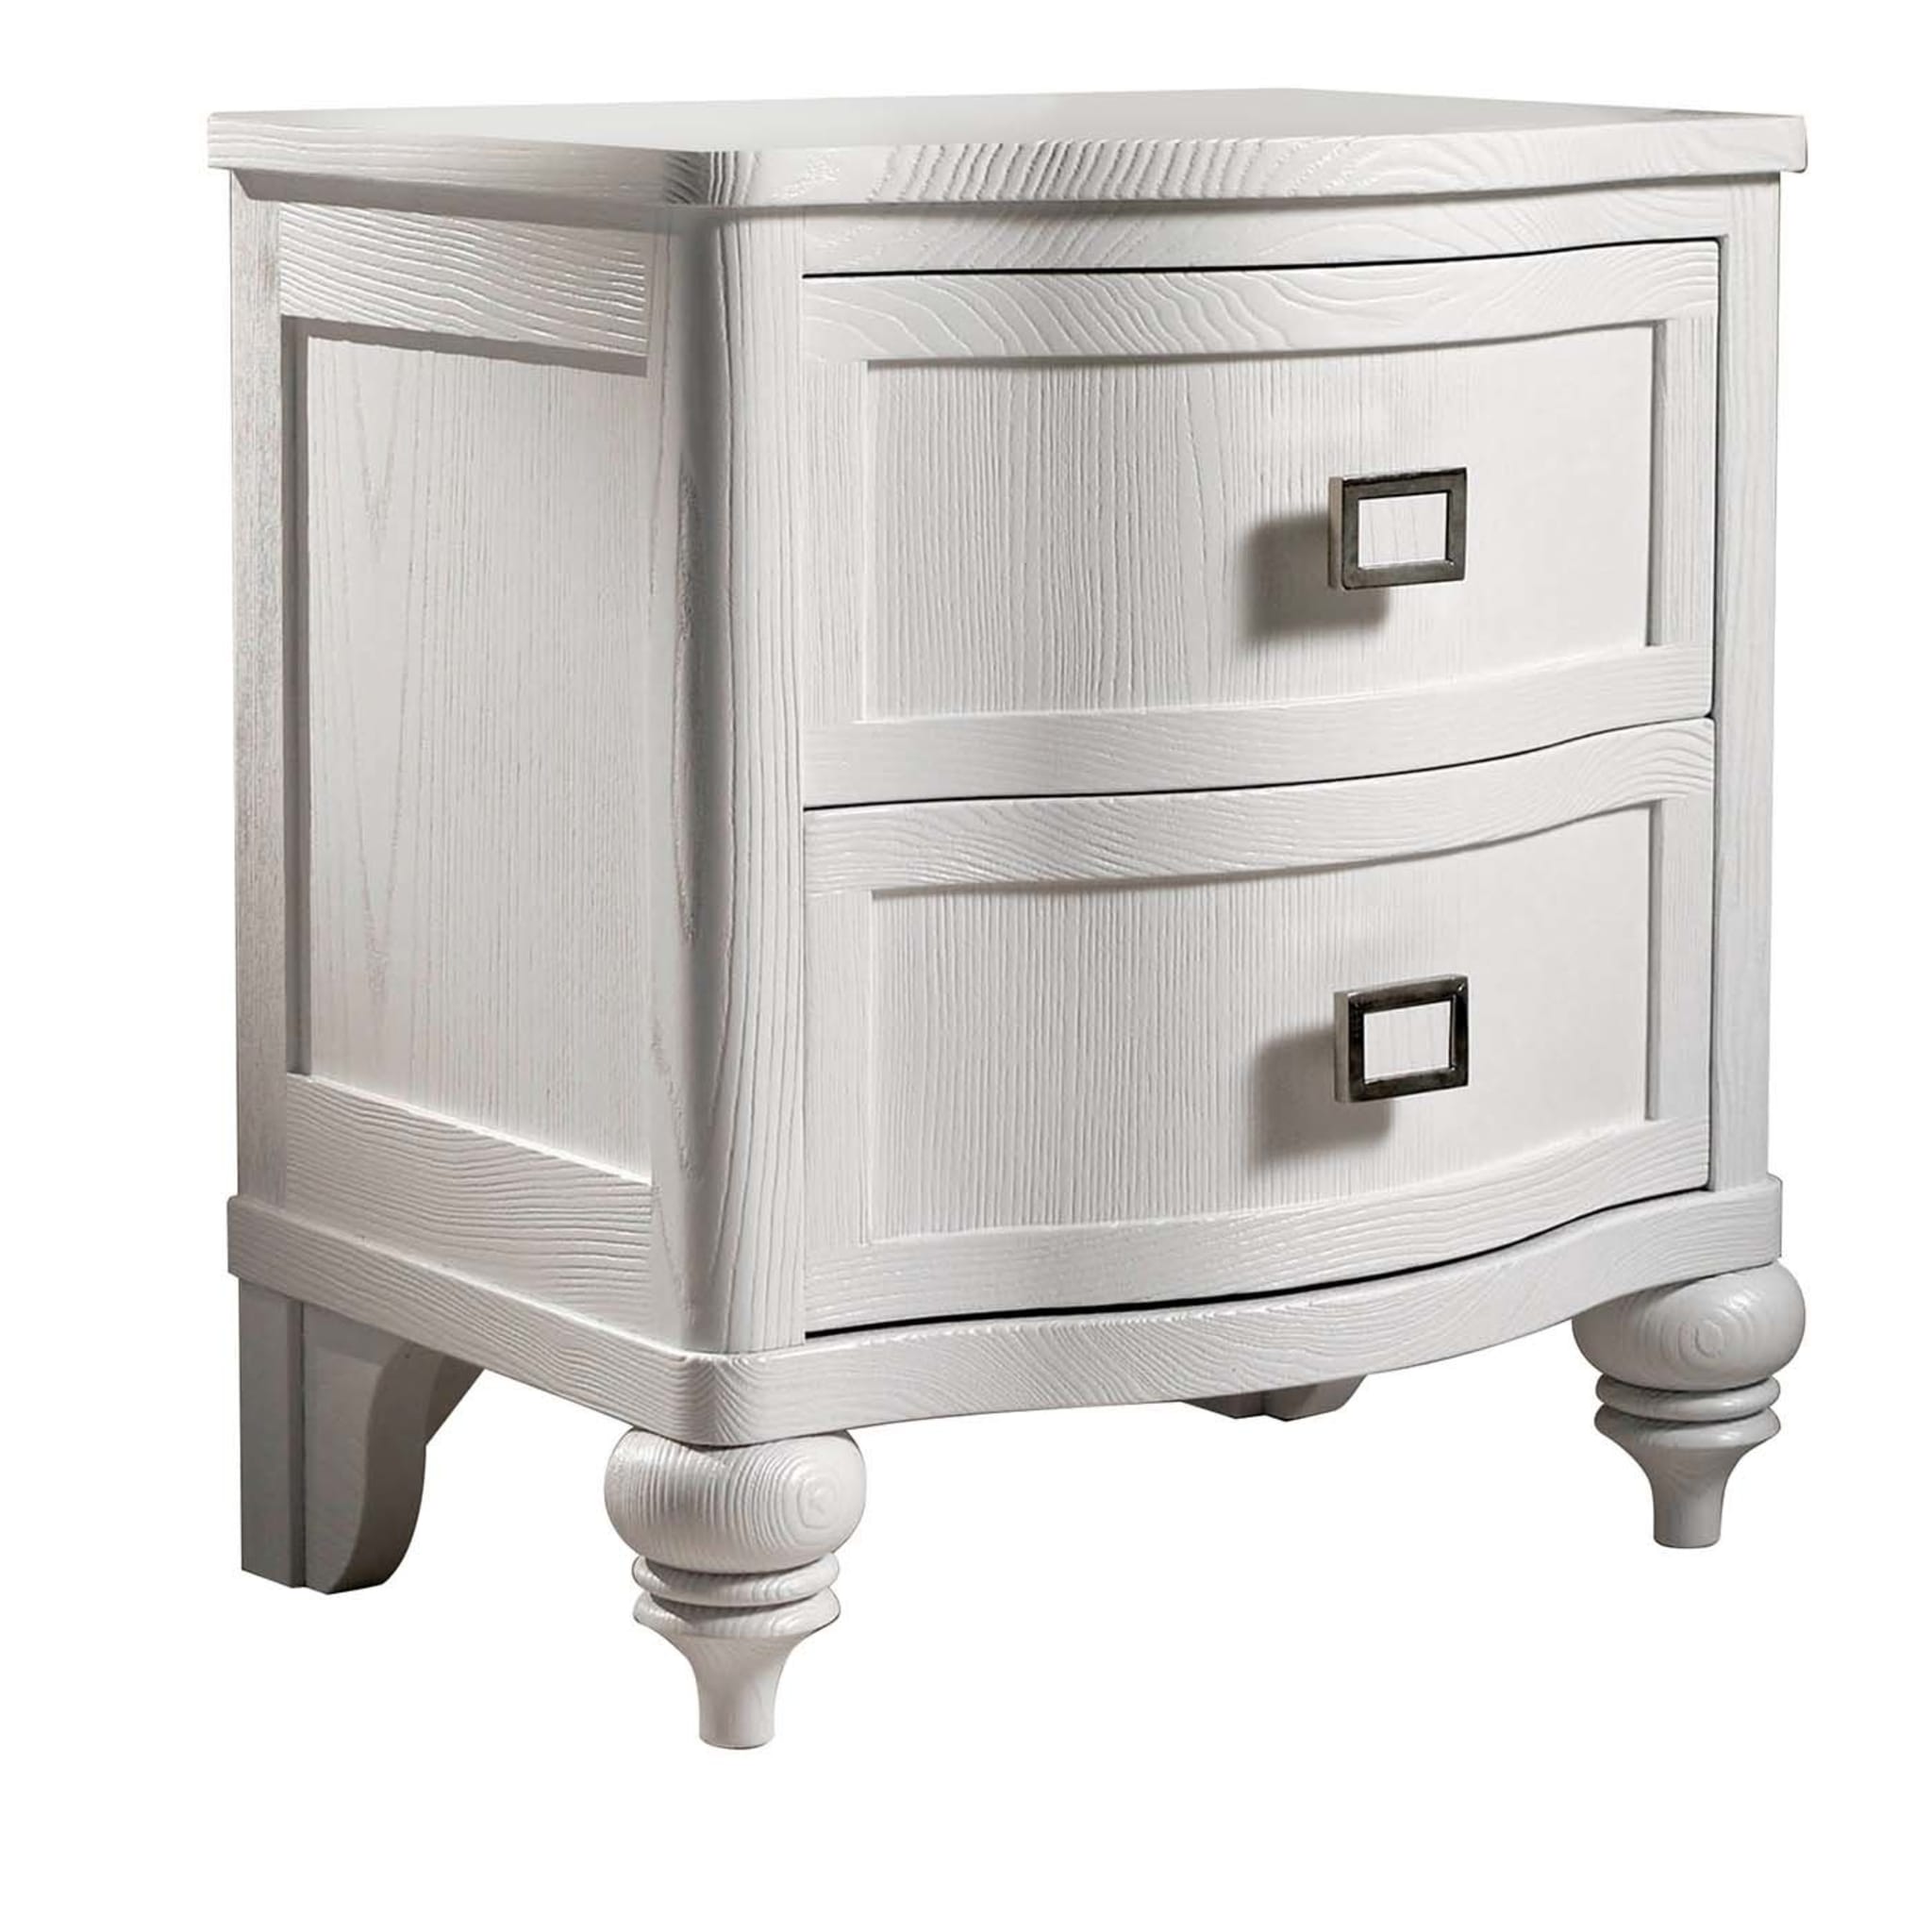 Contoured Bedside Table - Main view